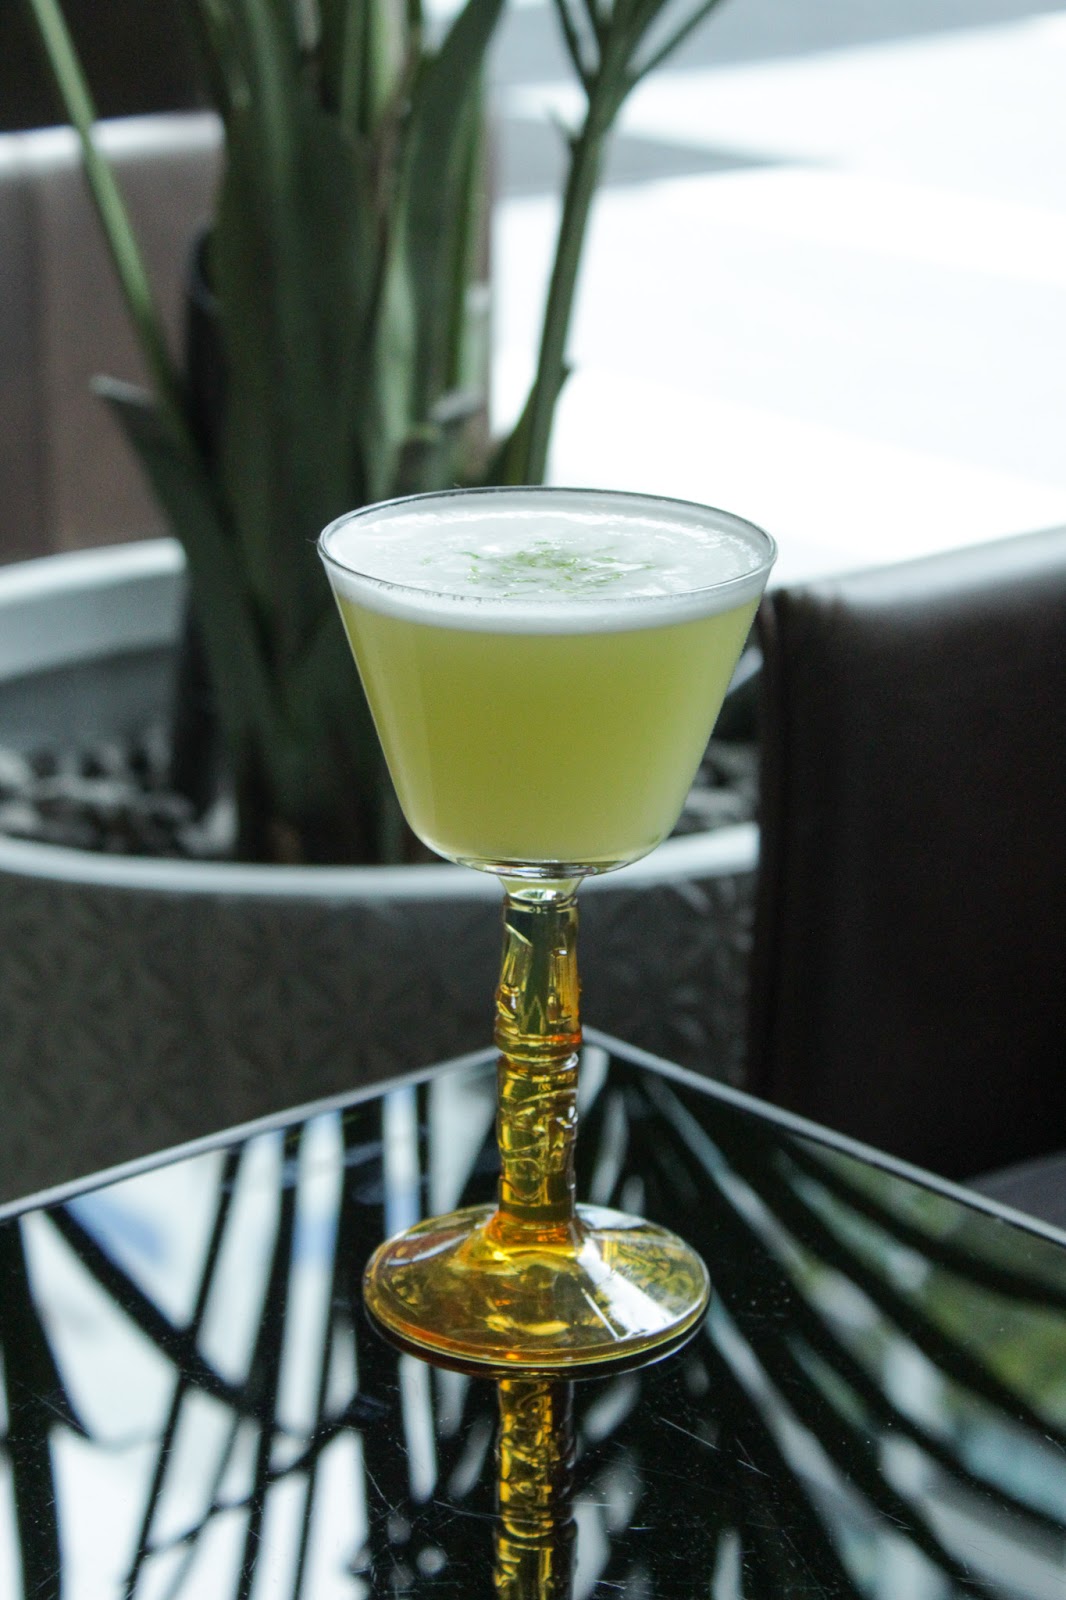 An image of the Ocean View cocktail at Boa Steakhouse.